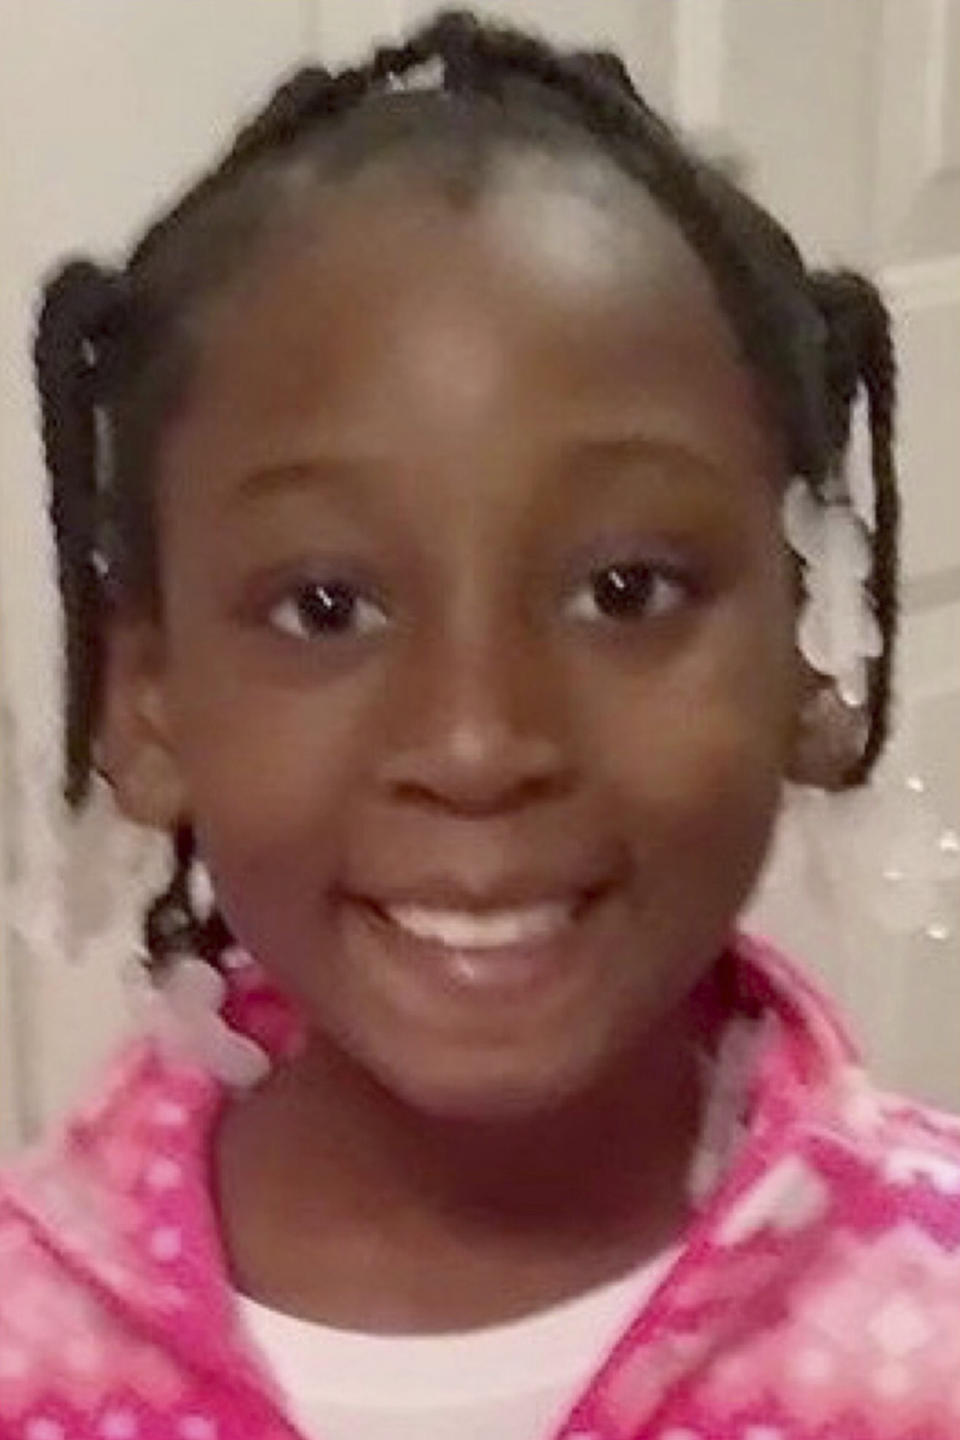 Trinity Love Jones, who was found dead in a duffel bag along a suburban Los Angeles equestrian trail on March 5, 2019. (Los Angeles County Sheriff’s Office via AP, File)